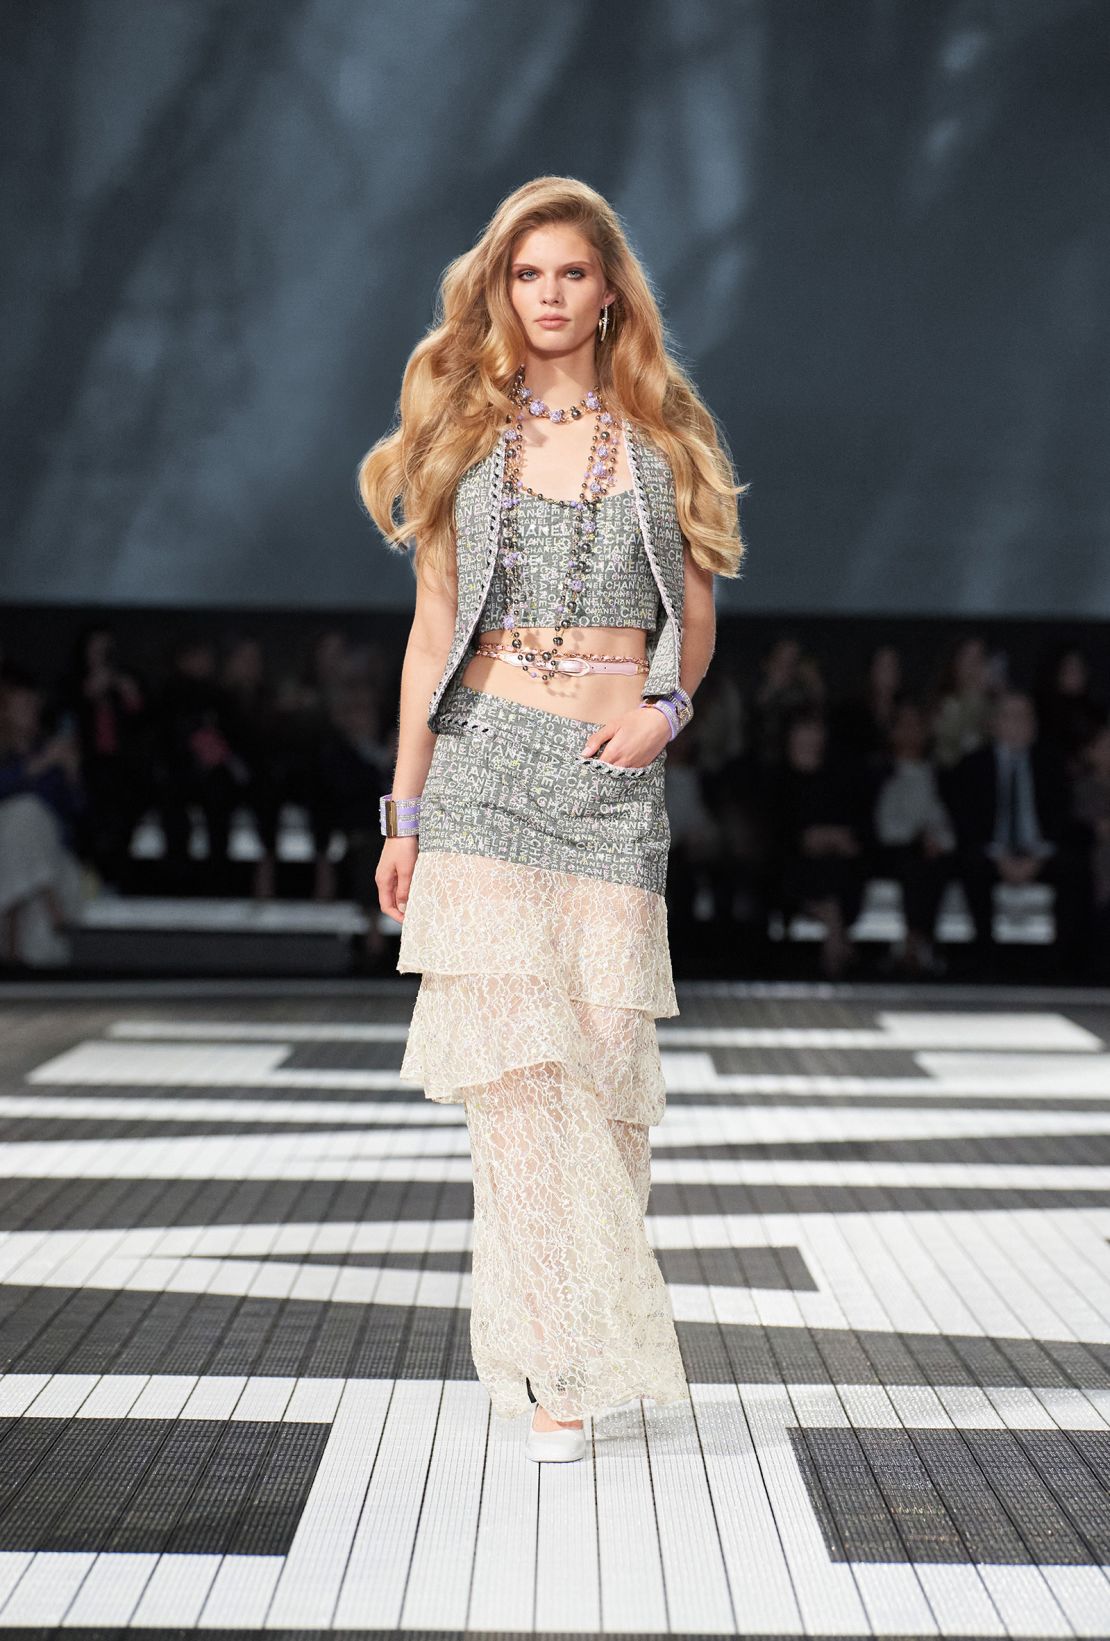 Malibu Barbies and Hollywood starlets: See inside Chanel's Los